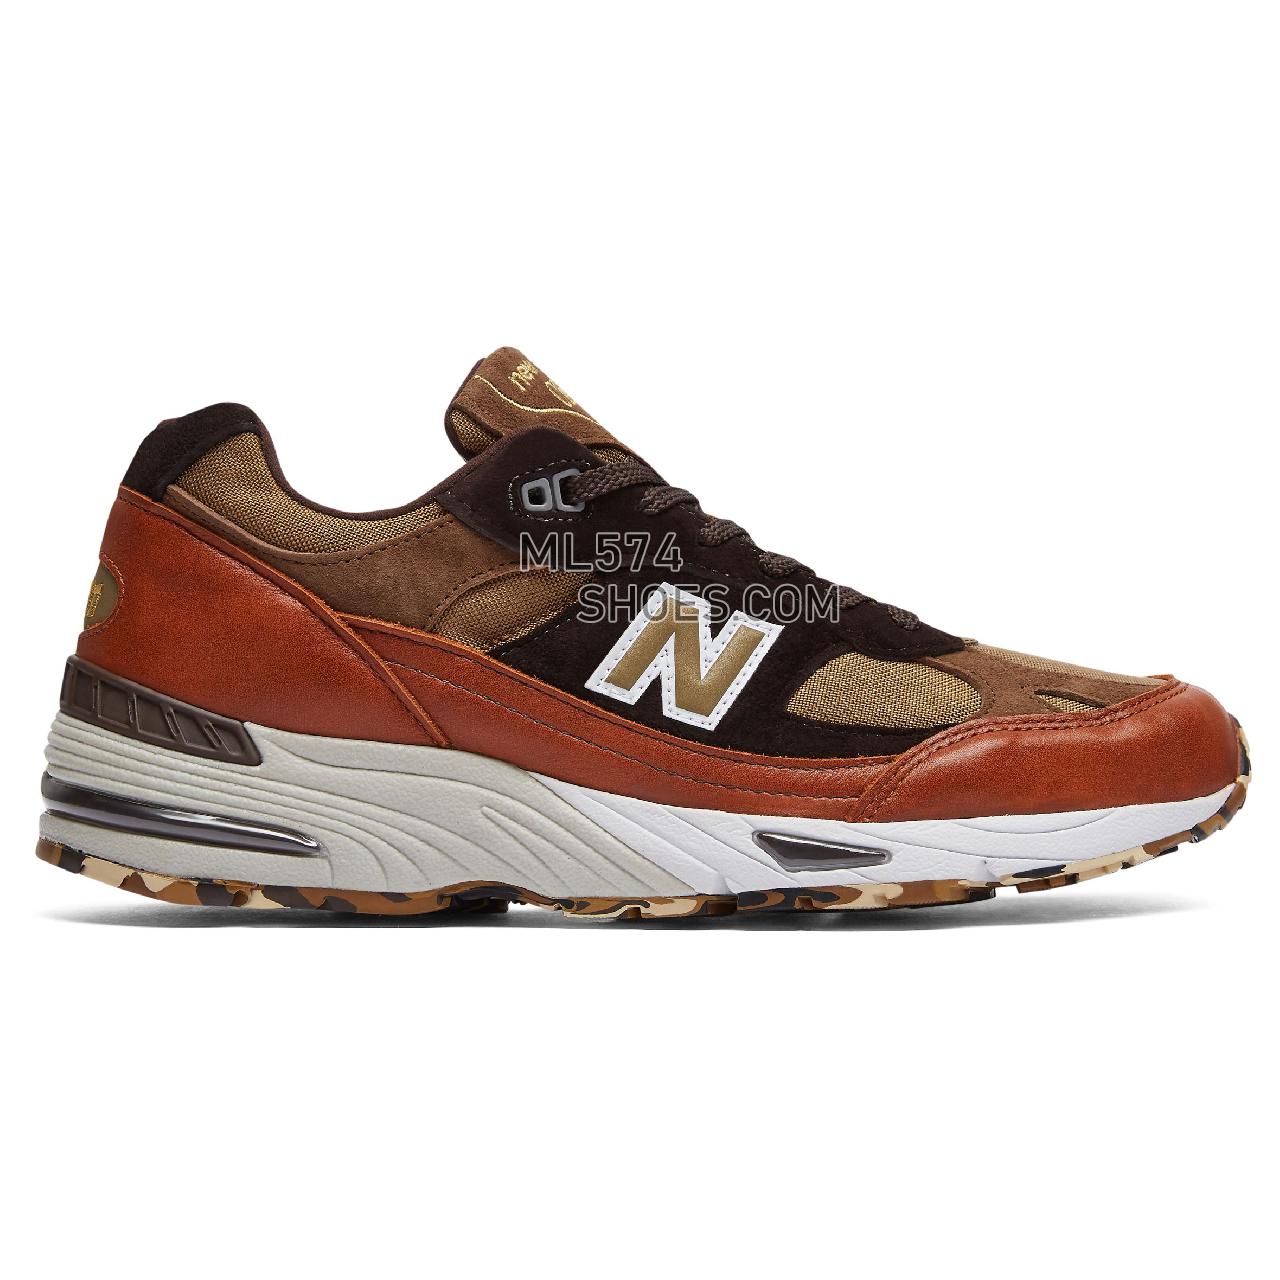 New Balance Made in UK 991 - Men's Made in UK 991 Classic ML991V1-27396-M - Burnt Orange with Brown and Light Brown - M991SOP